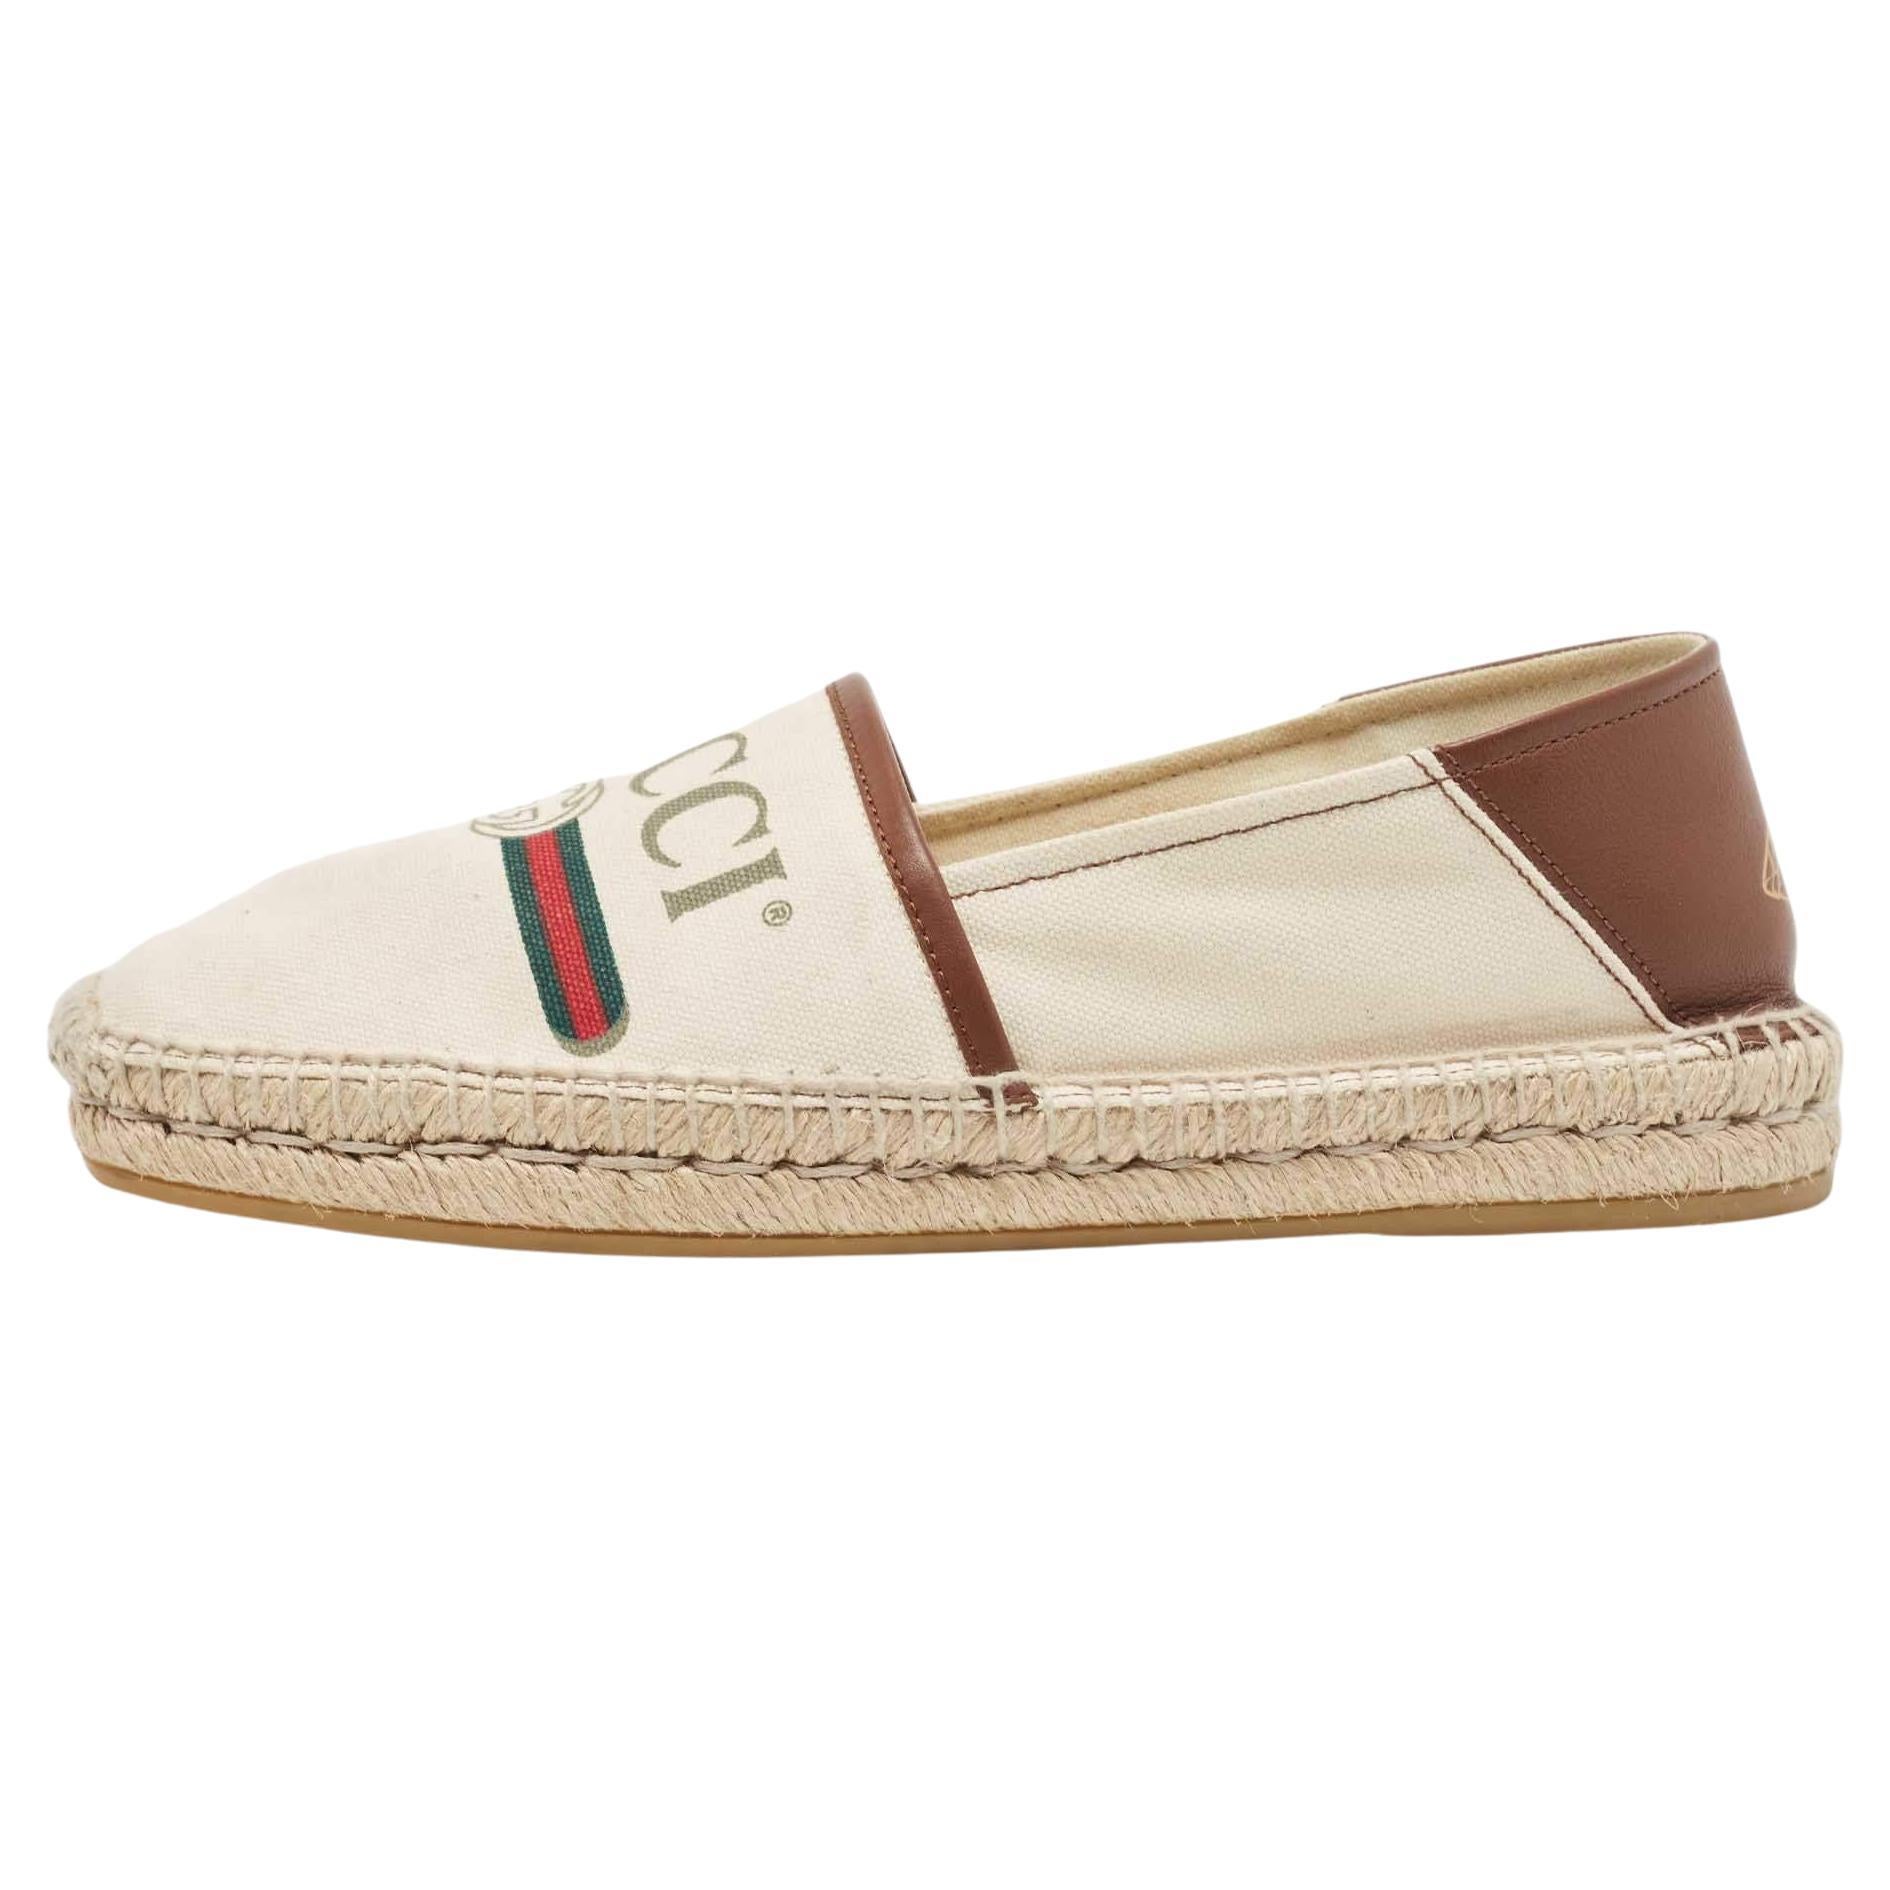 Gucci White/Brown Leather and Canvas Espadrille Flats Size 40